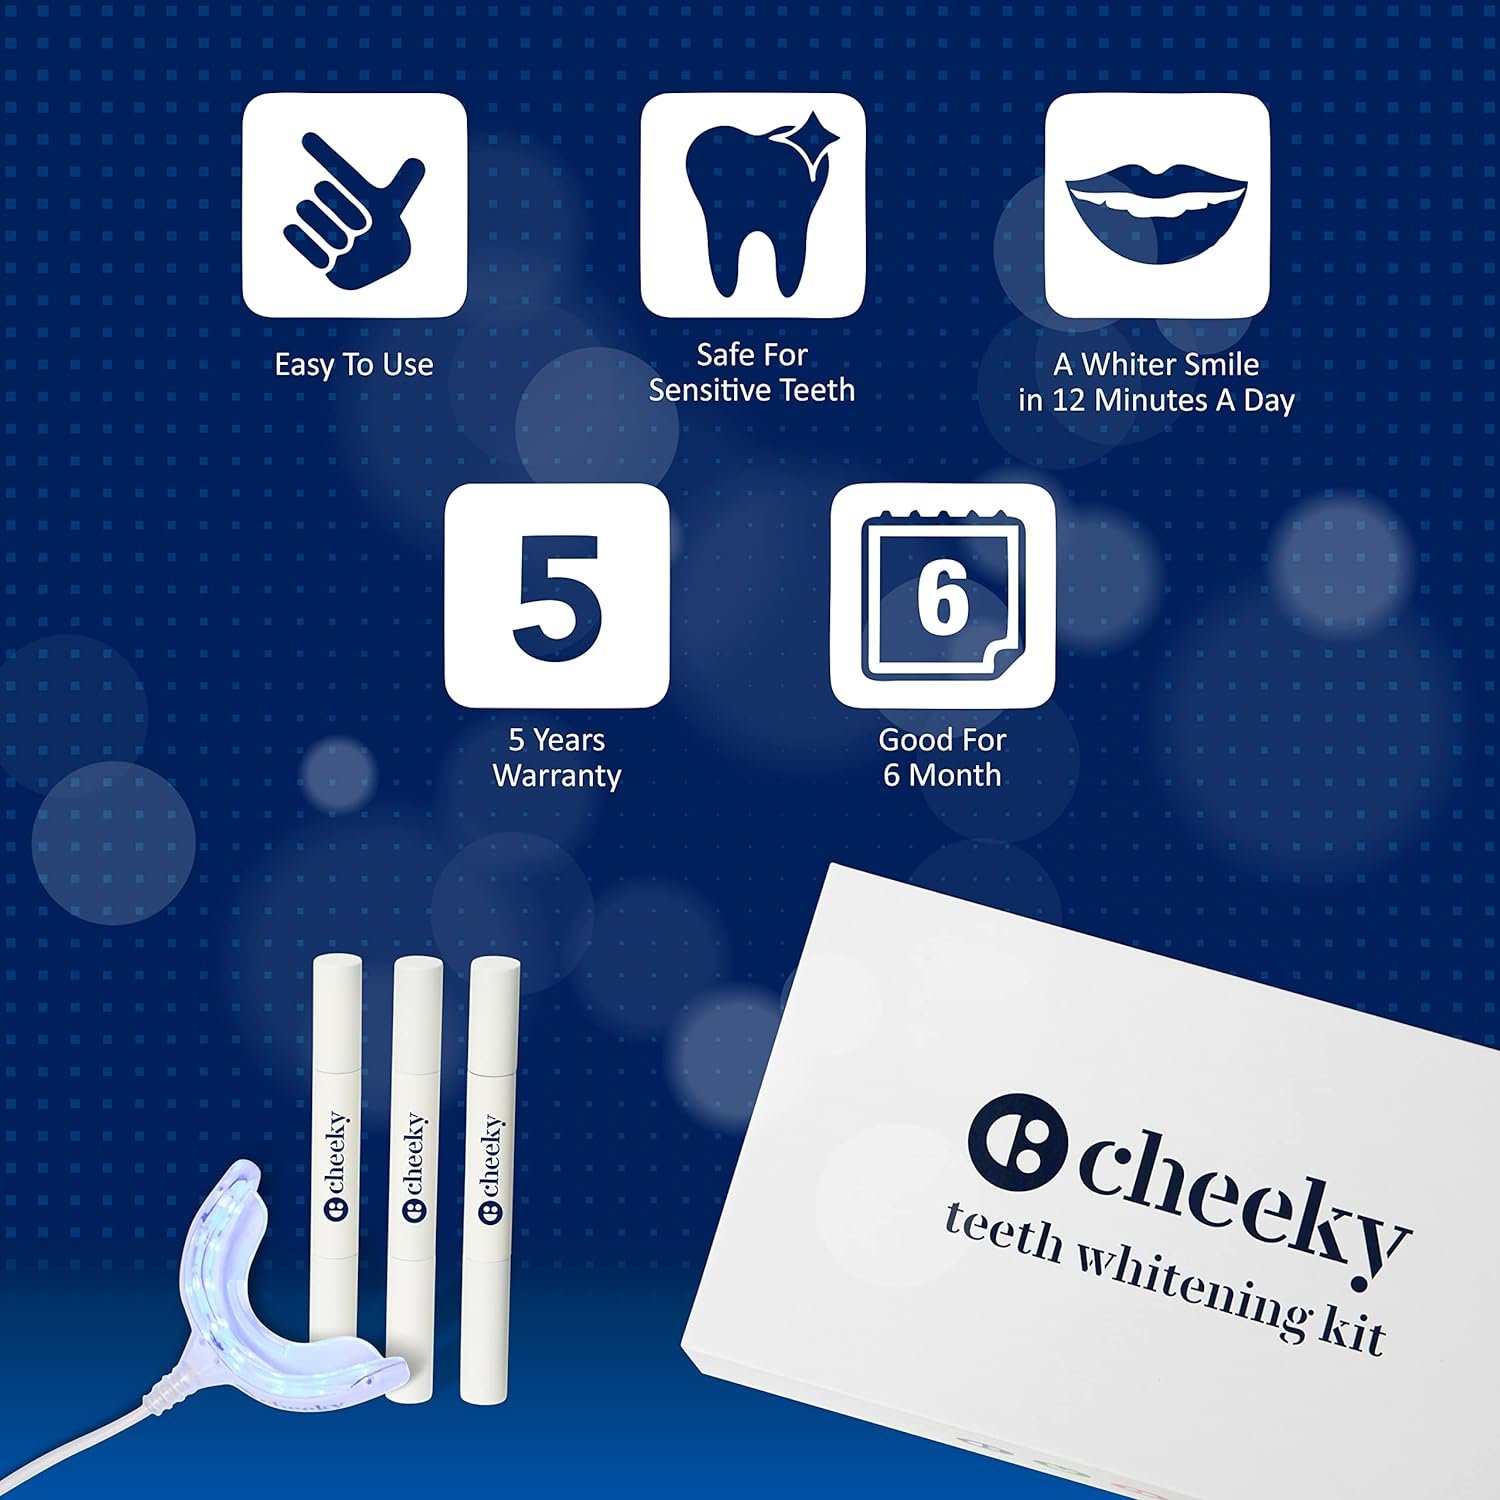 Cheeky LED Teeth Whitening Kit with Whitener Gel and Mouthpiece, DIY Home System to Diminish Stains and Discoloration, Dental and Enamel Safe